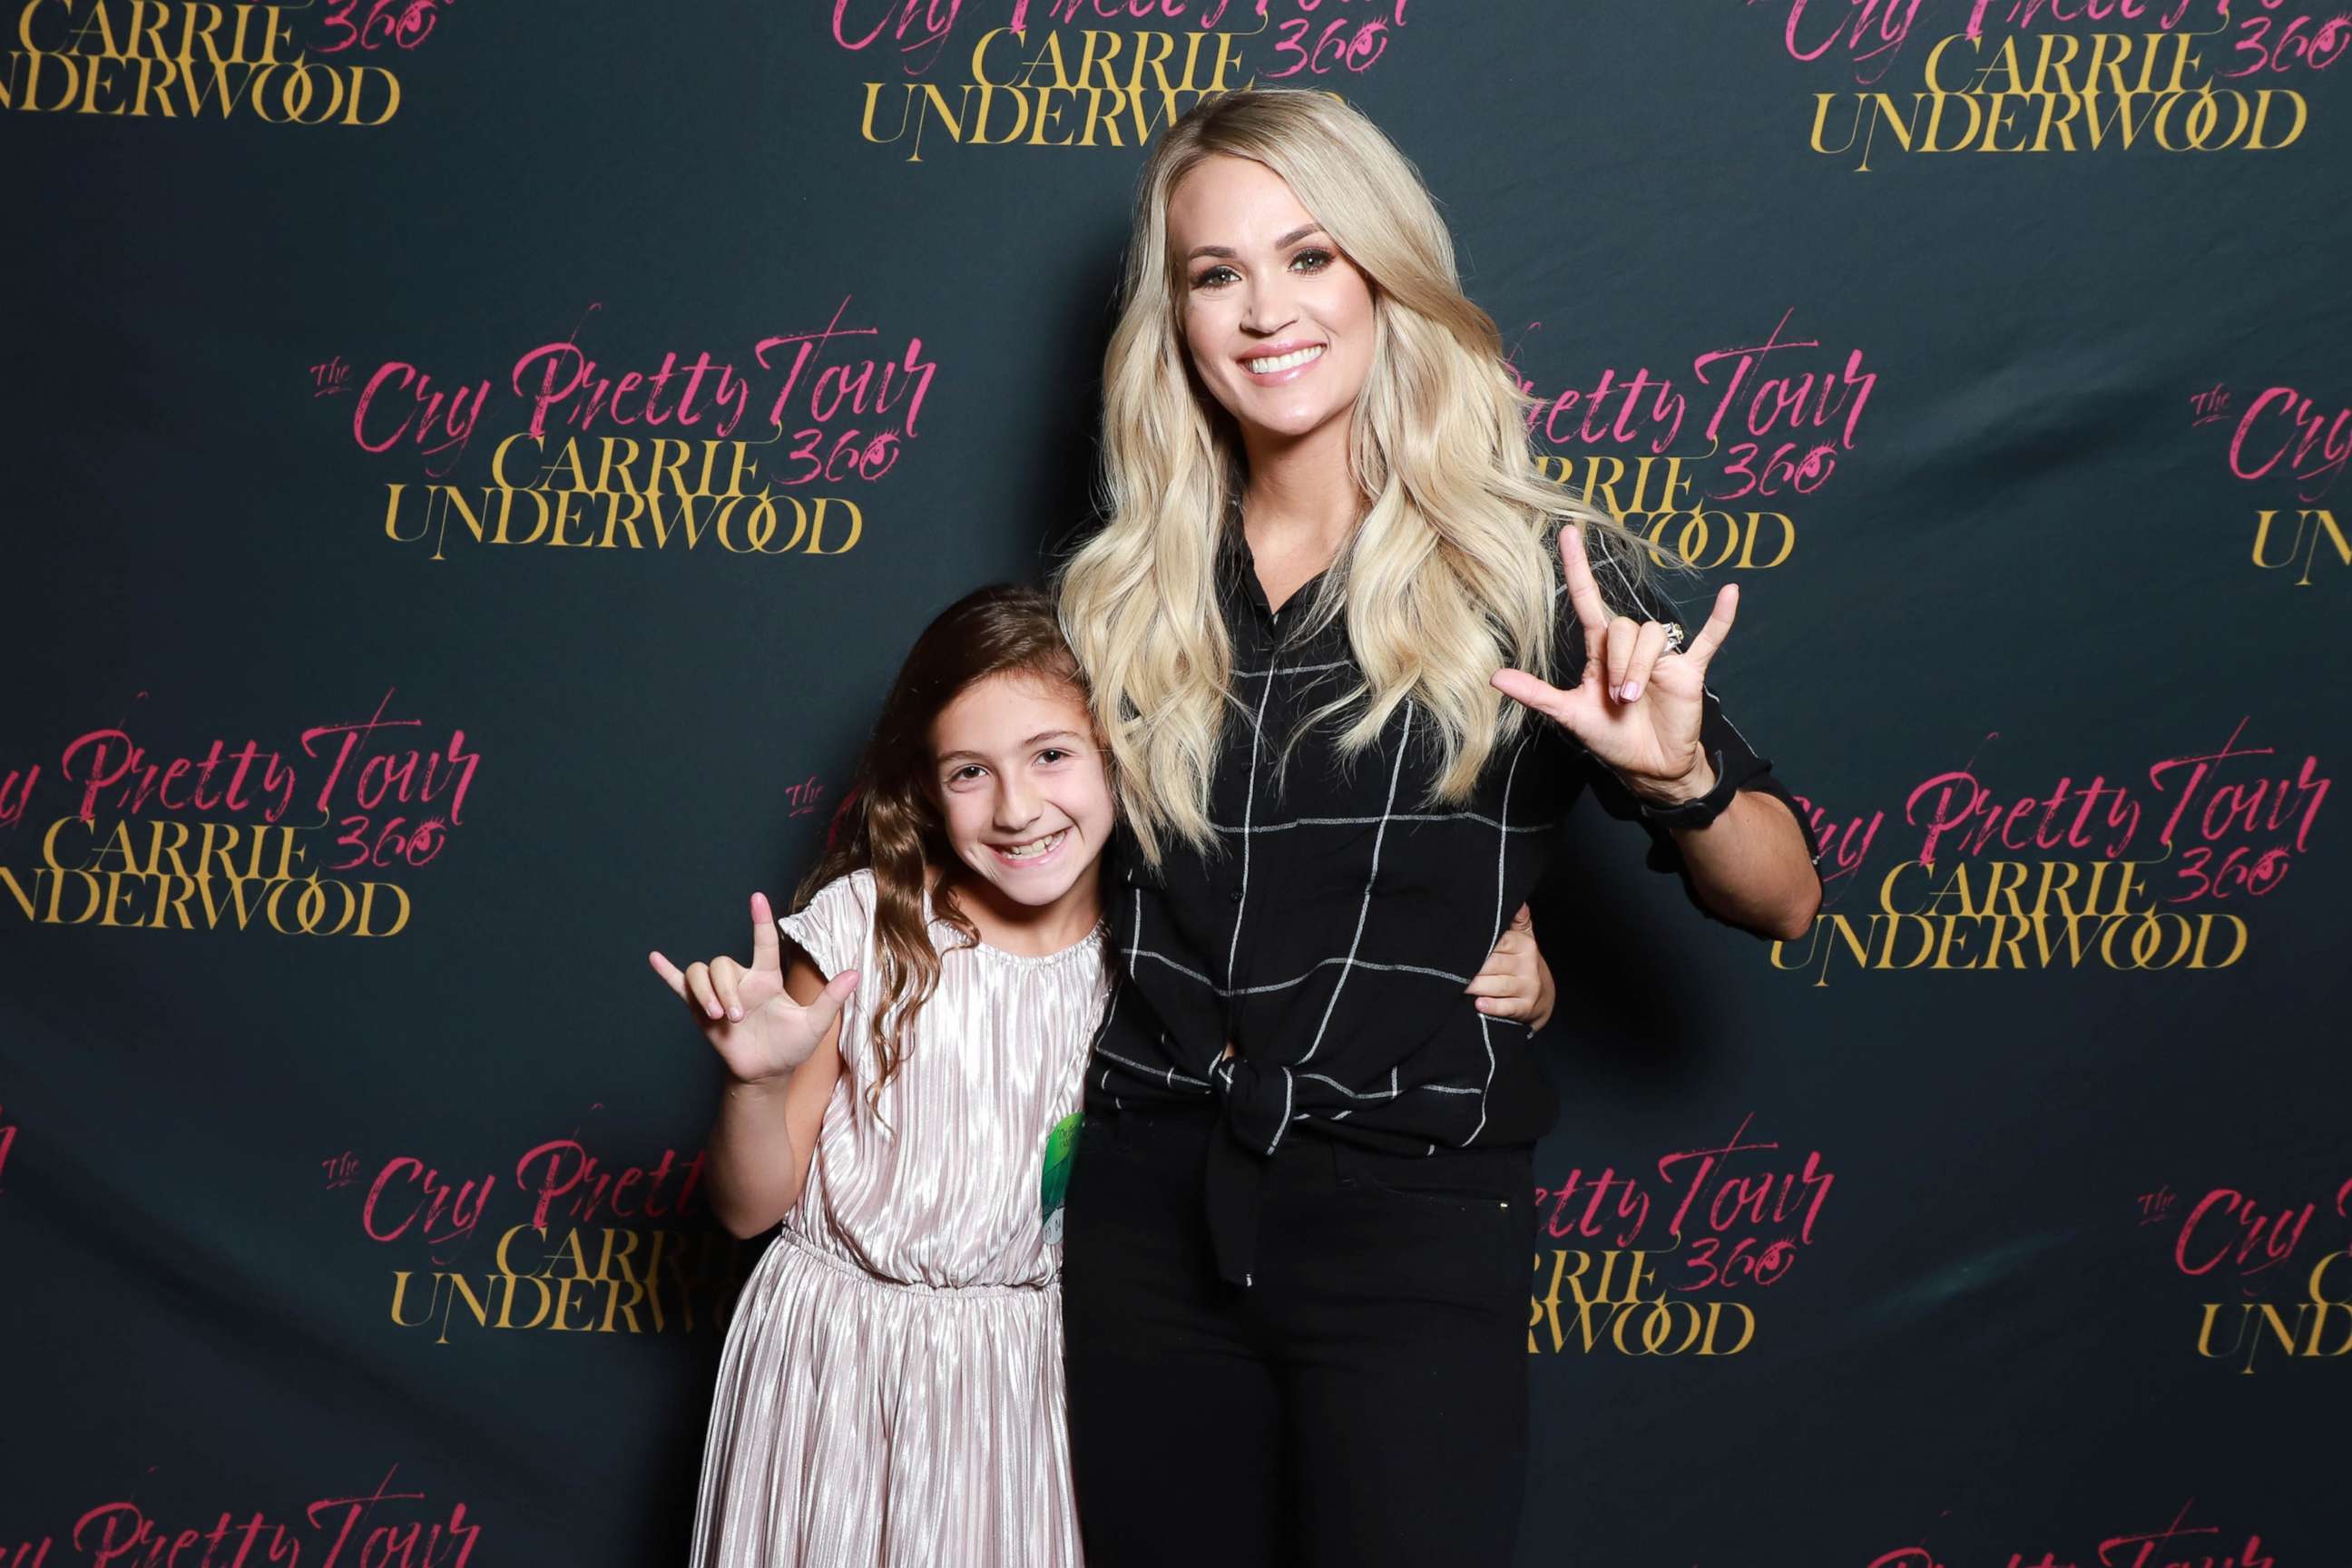 Carrie Underwood shares snap of her and family celebrating